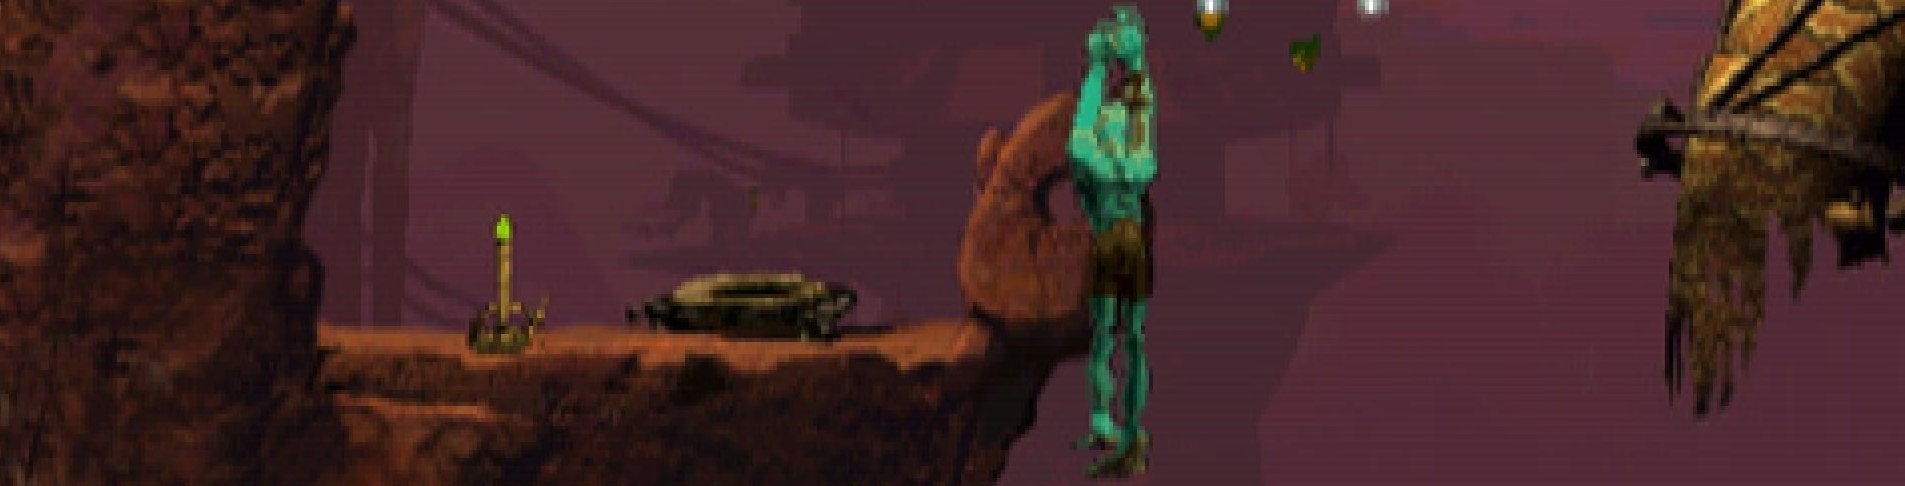 Image for Video: Let's Replay Oddworld: Abe's Oddysee